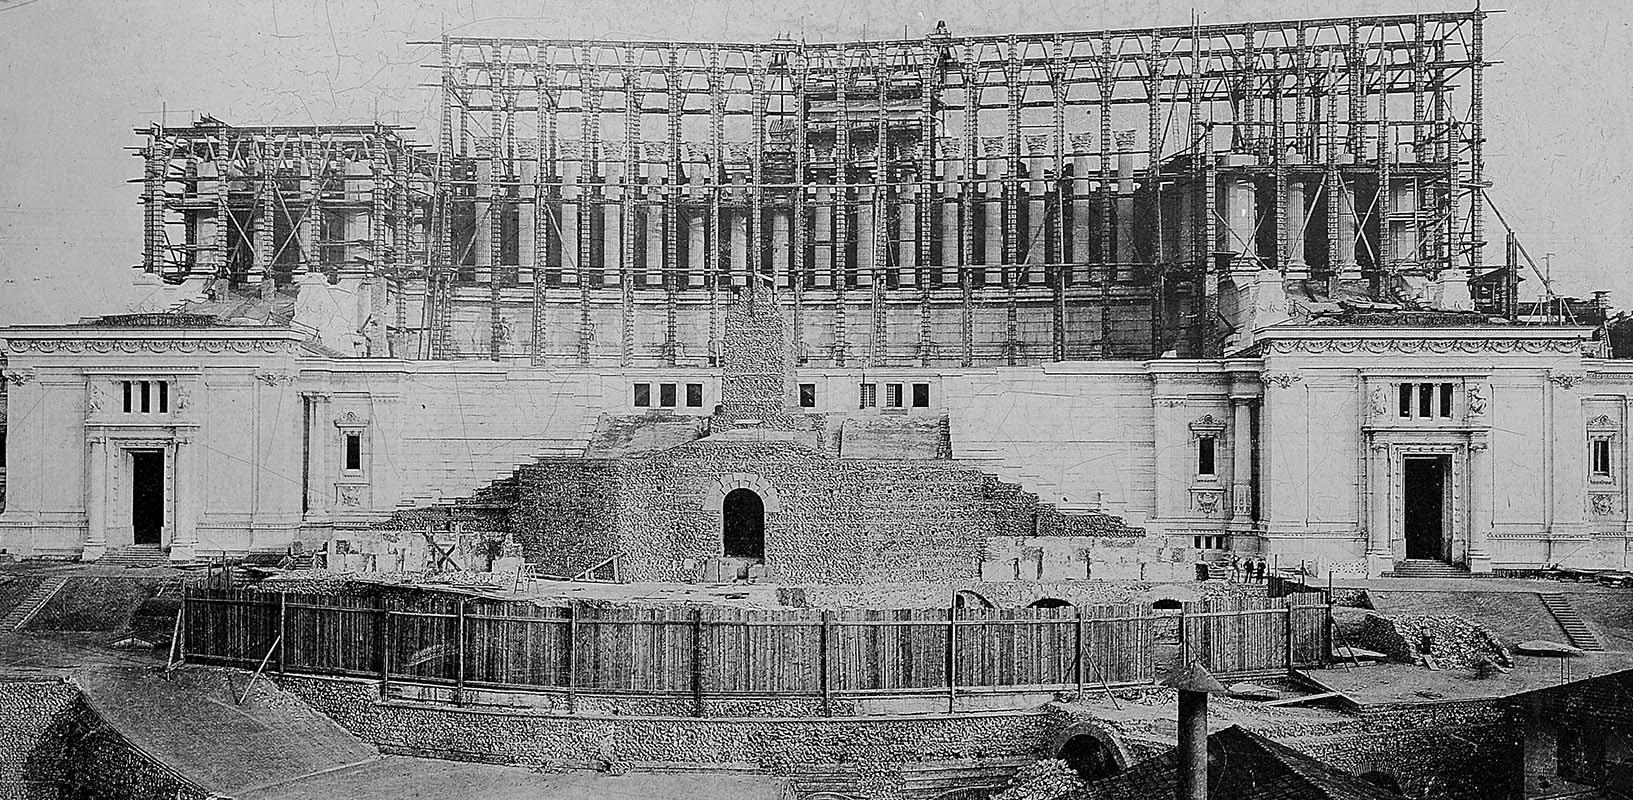 Construction of the Vittoriano under way with the expansion of the portico
